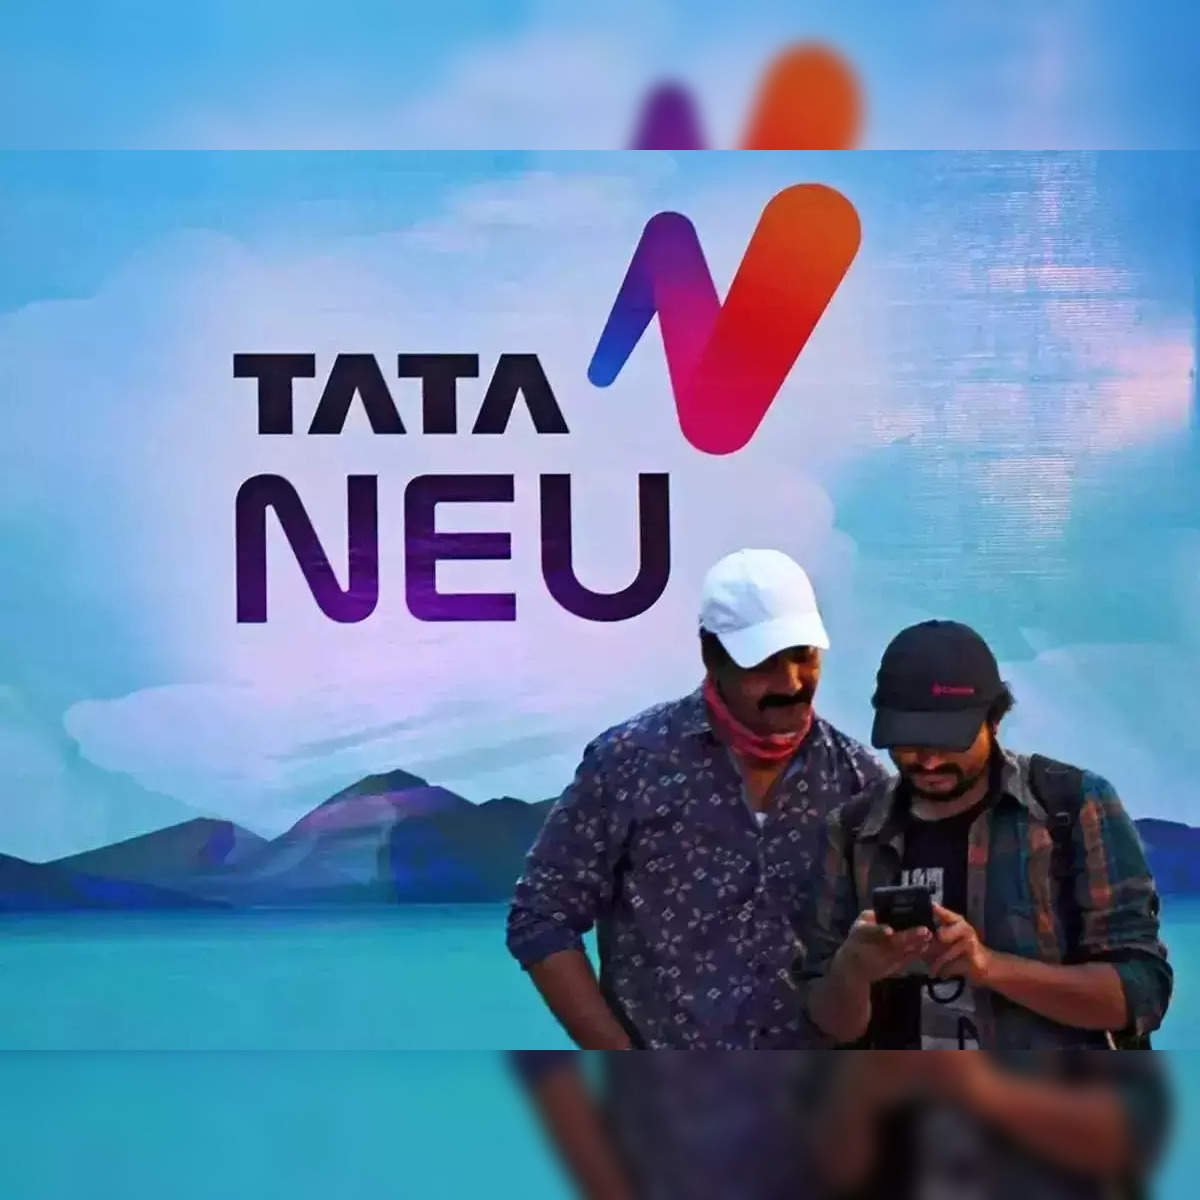 Tata Neu to be launched on April 7: A quick look at what the 'super app'  has in store